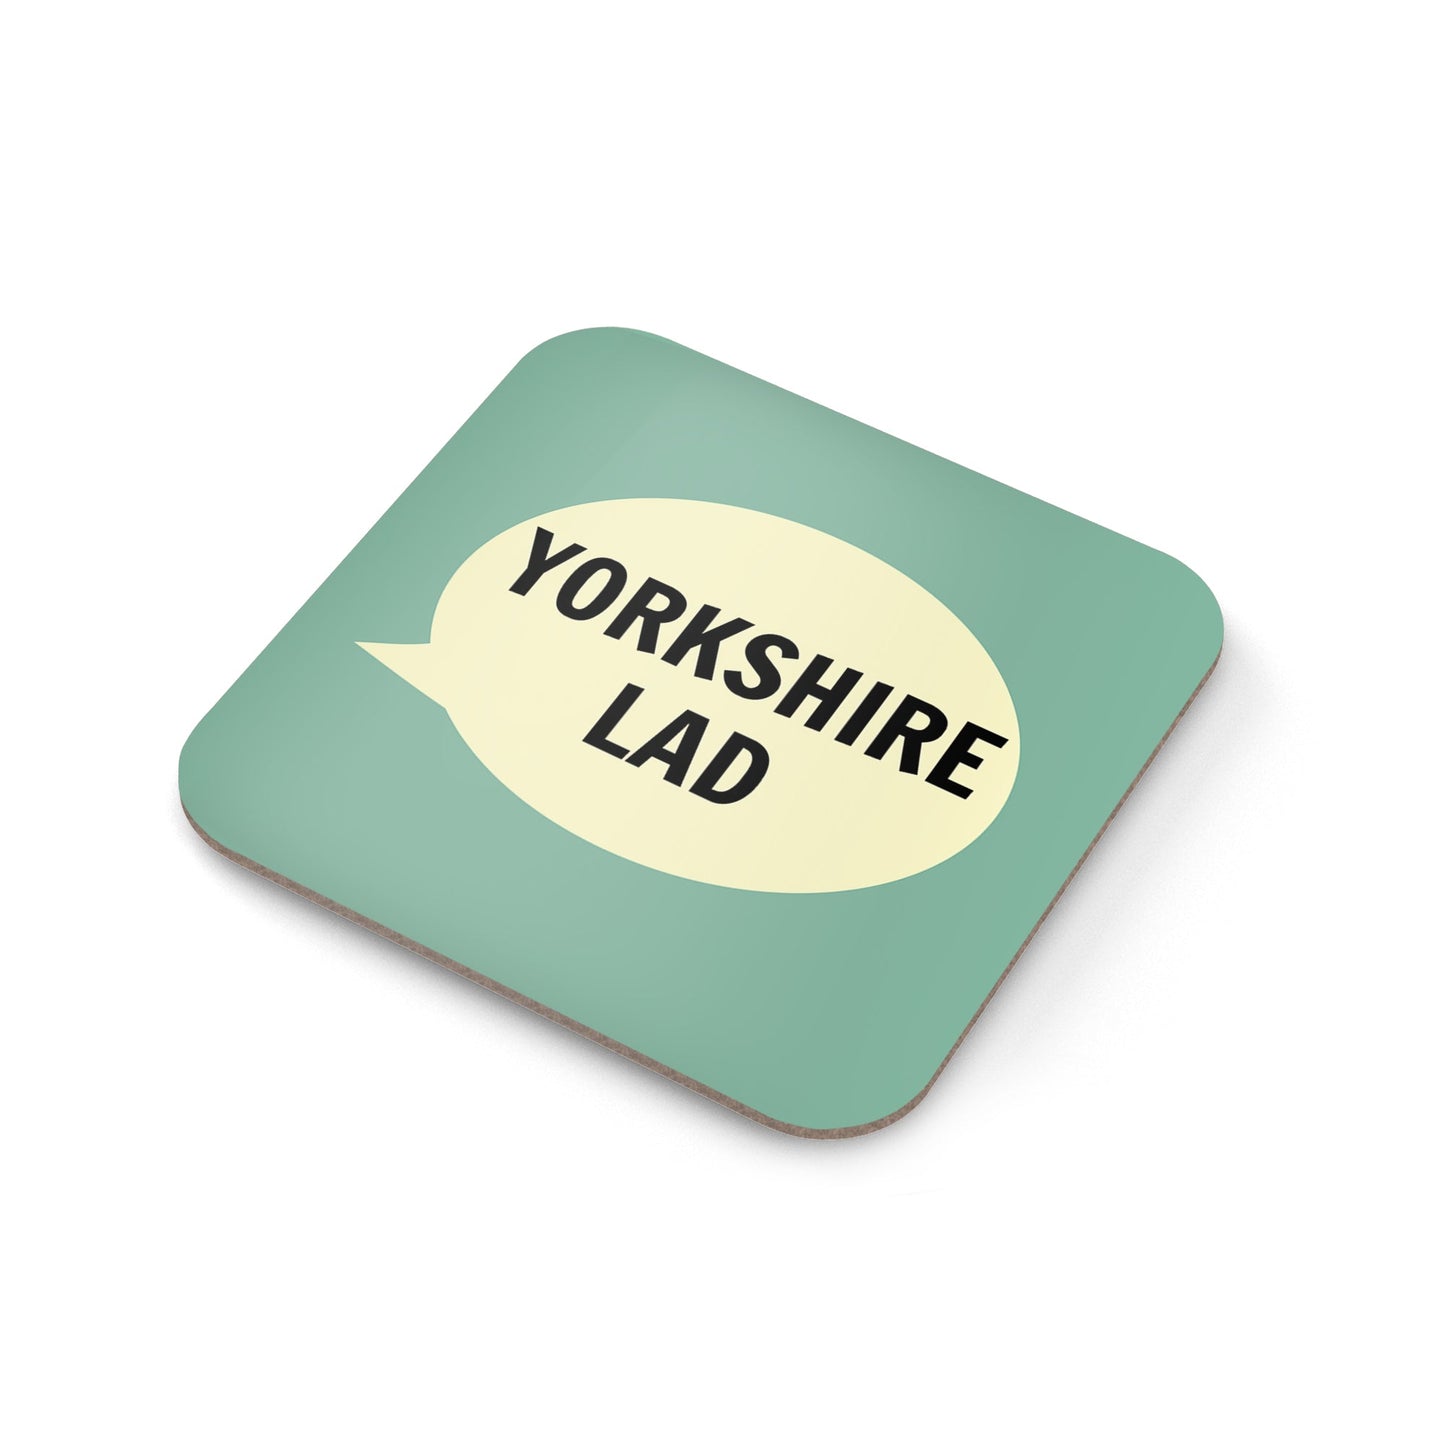 Yorkshire Lad Coaster - The Great Yorkshire Shop